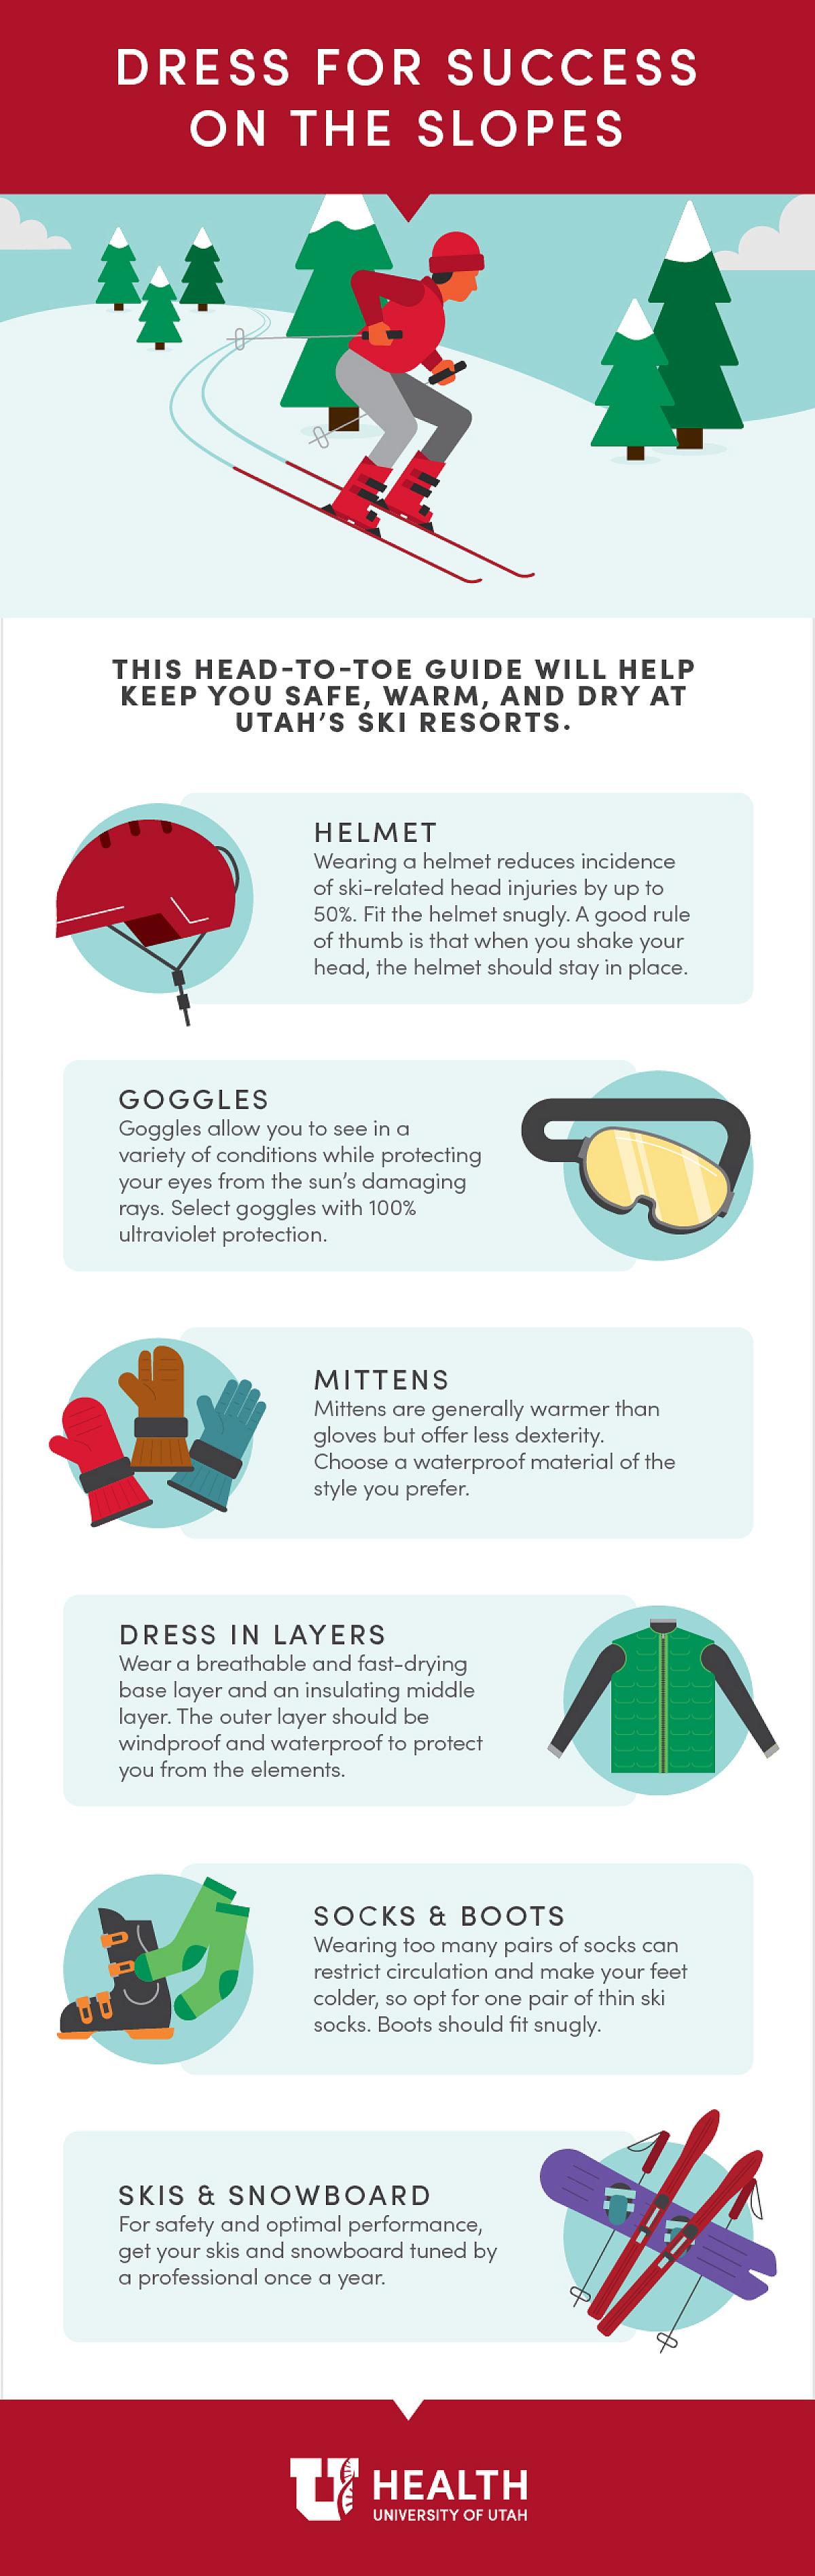 Winter Sports, Dress for the Slopes Infographic | University of